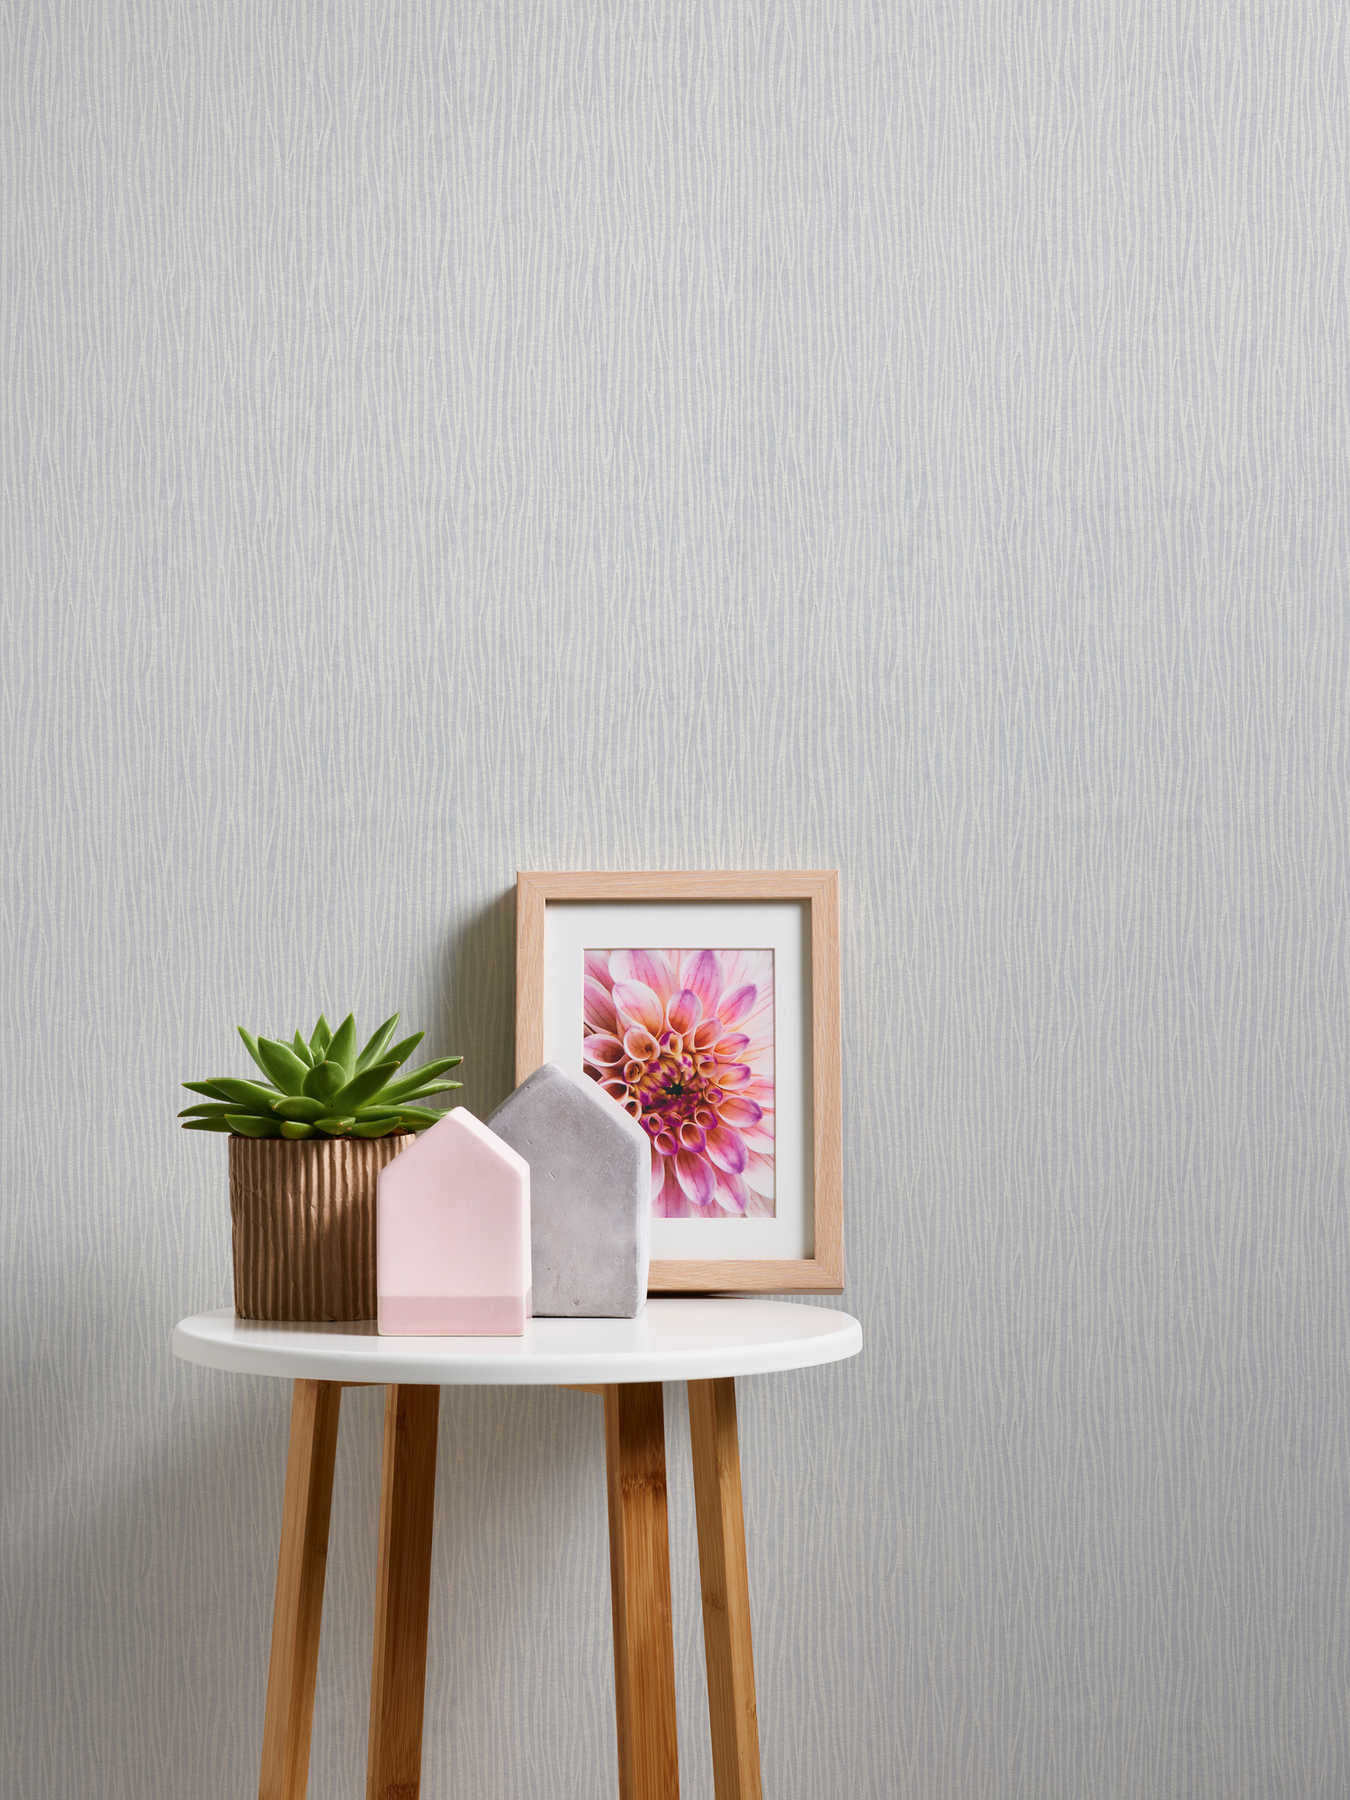             Paintable non-woven wallpaper with natural line design
        